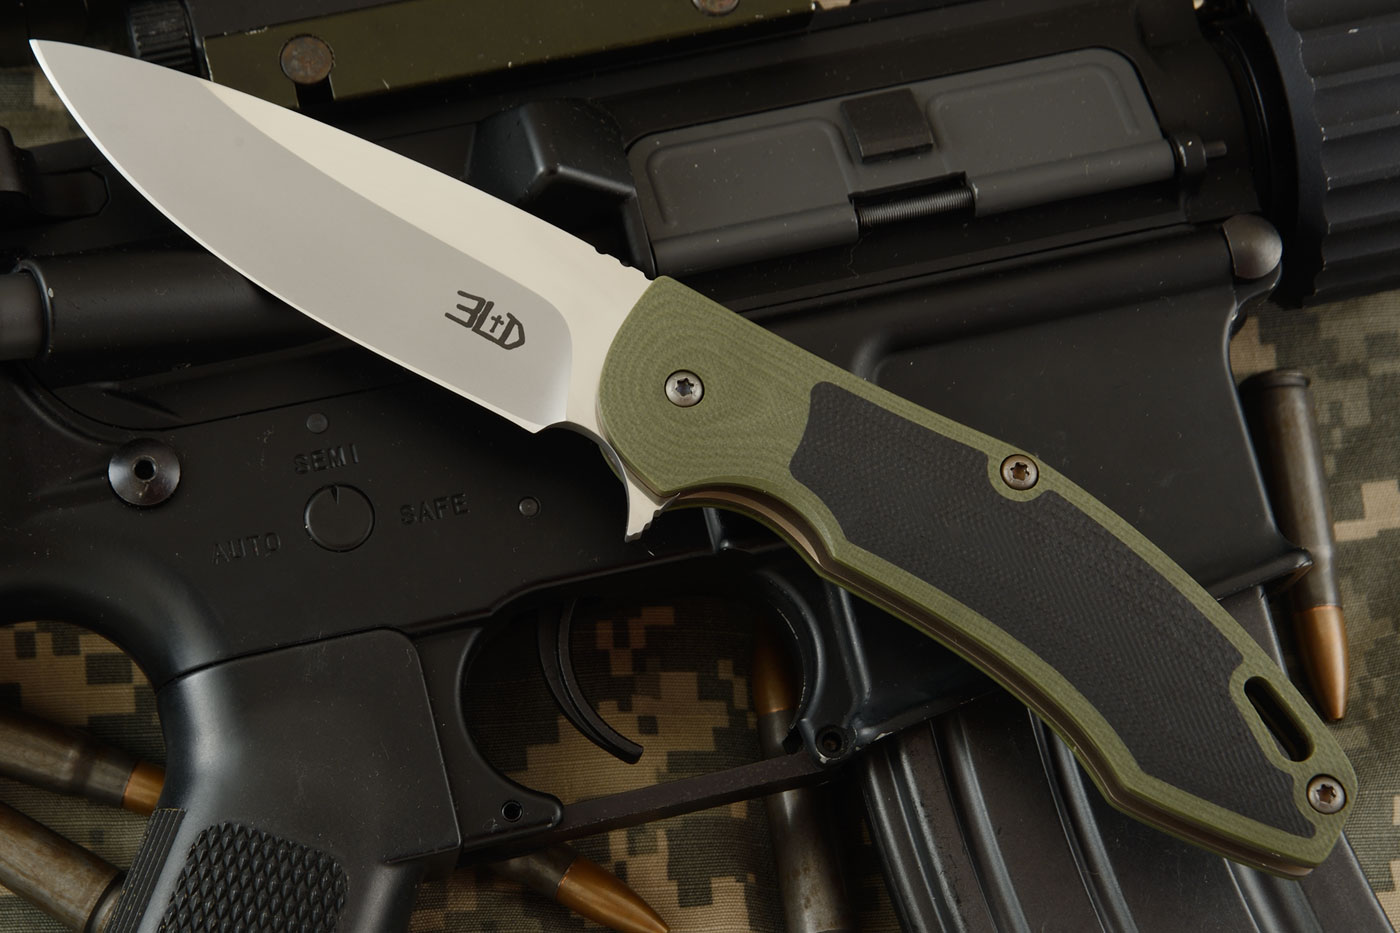 H4 Flipper with Green and Black G10 (Ceramic IKBS)